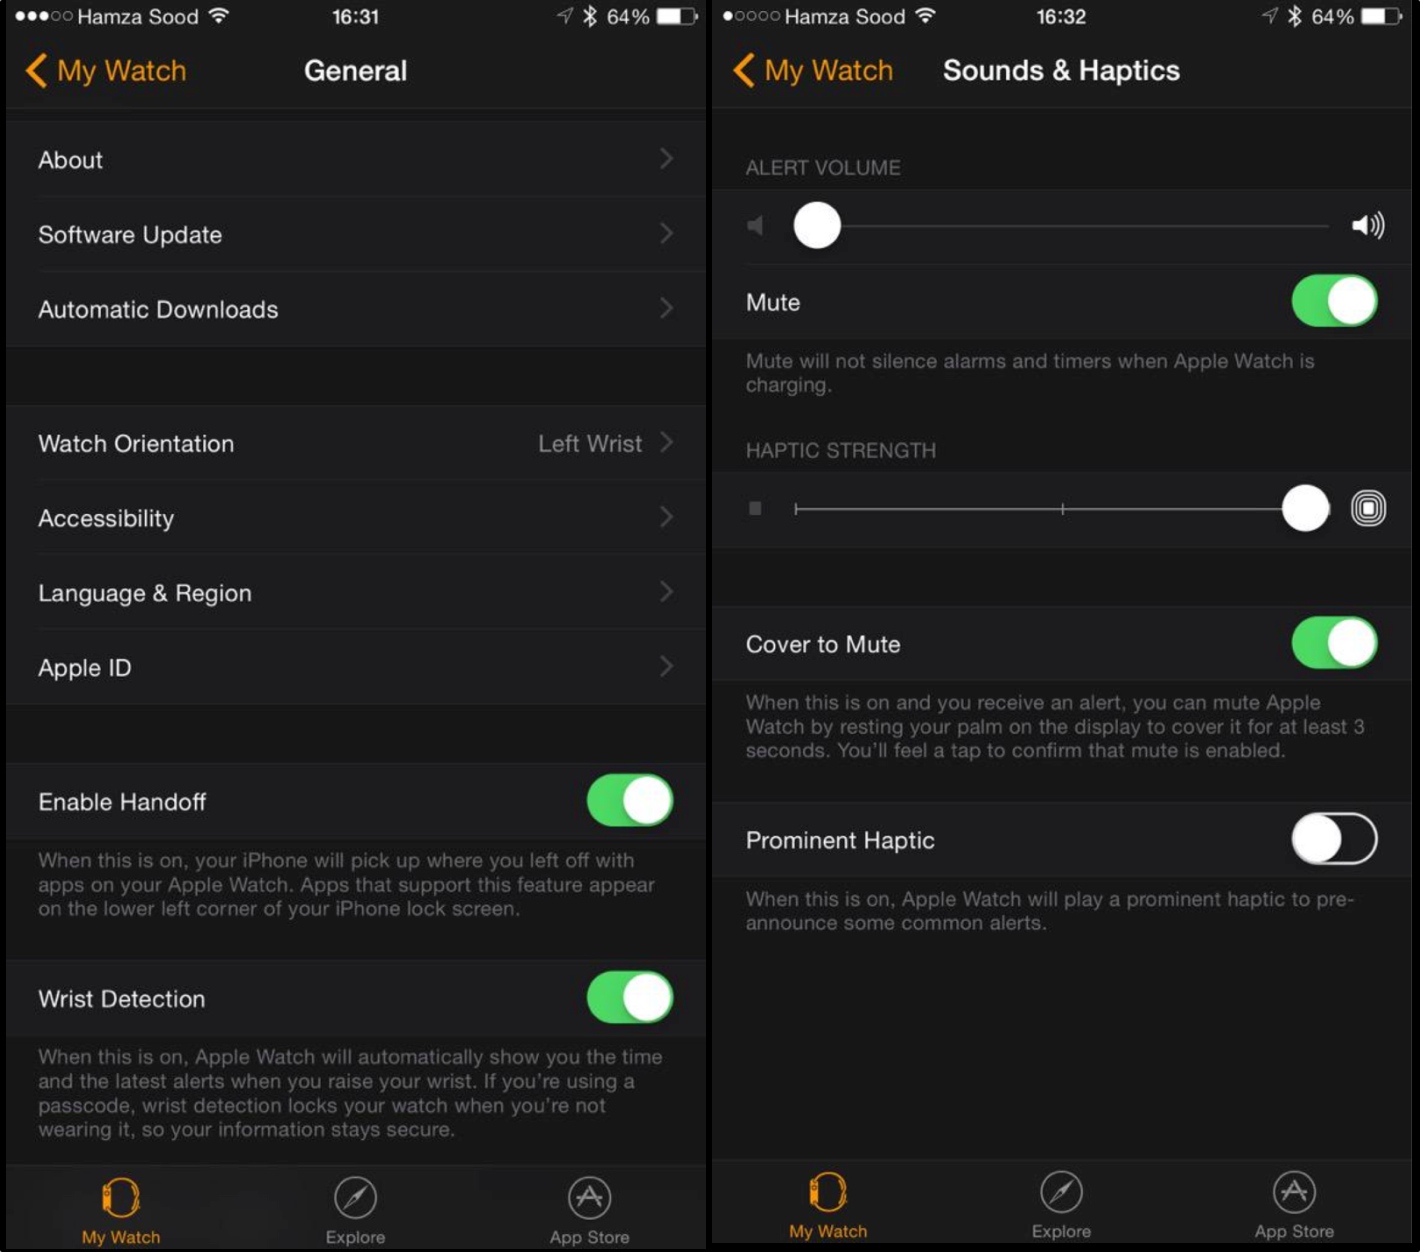 Interface, Options Revealed For Apple Watch iPhone App